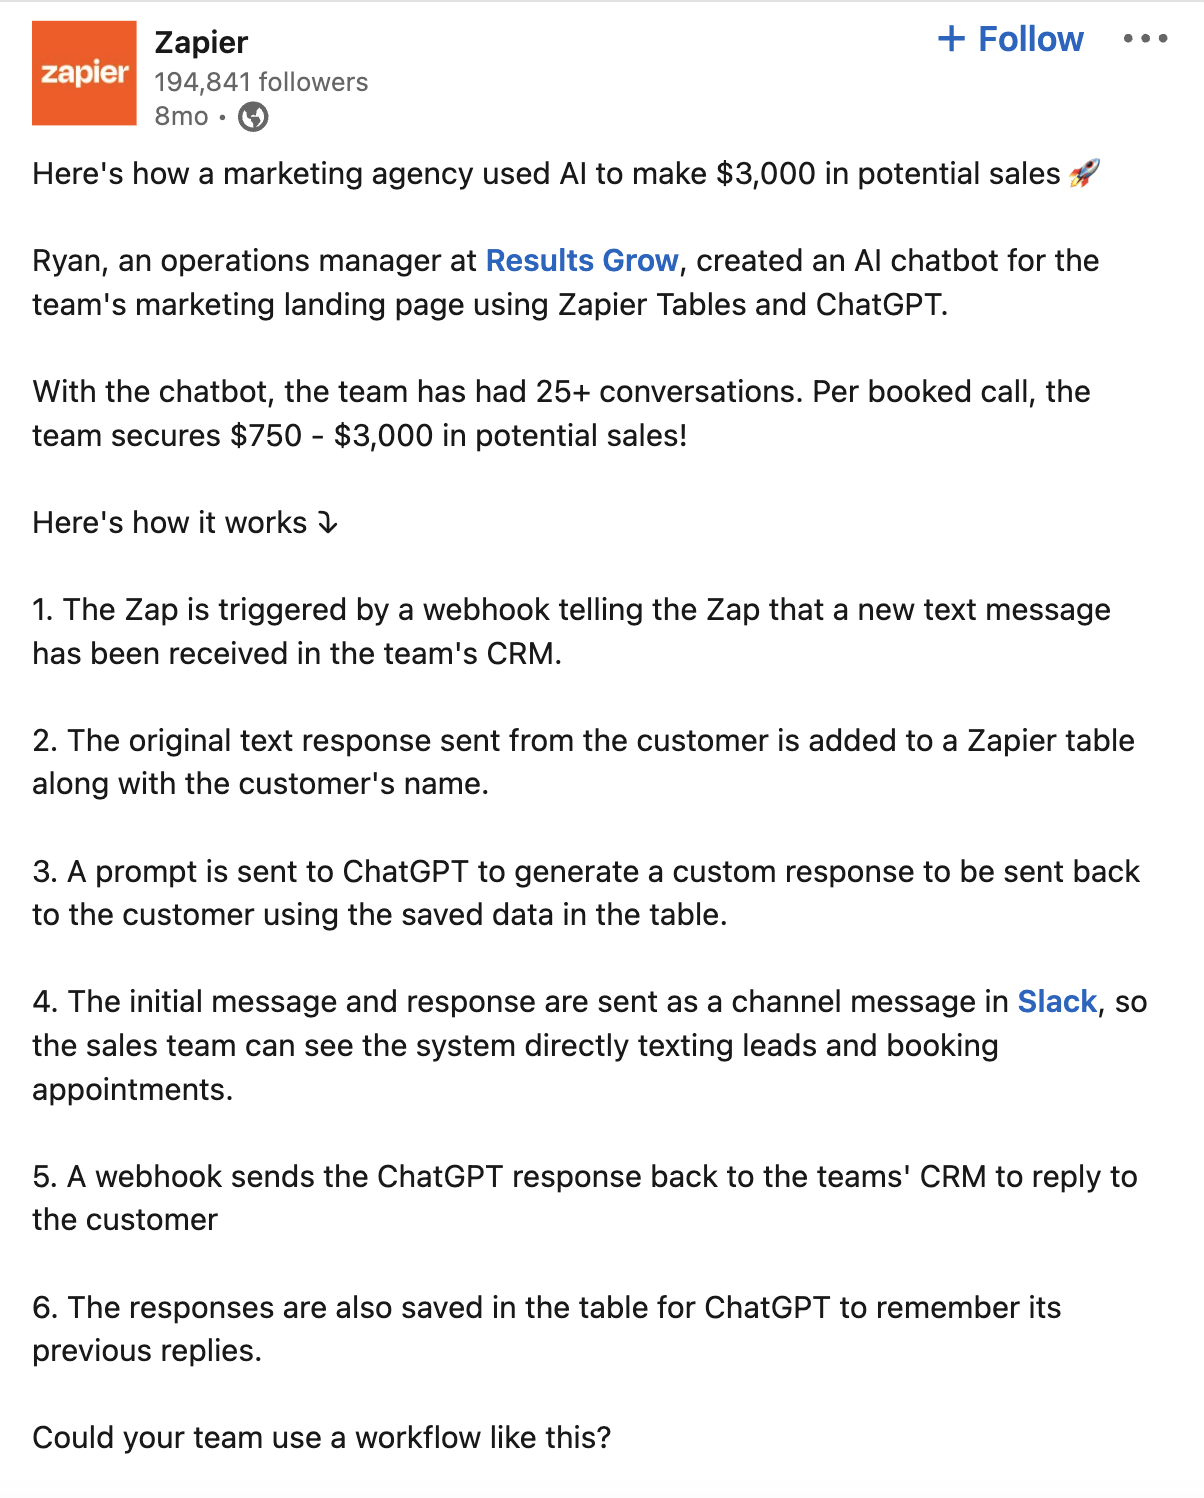 Zapier's LinkedIn post sharing a story of how a user was able to improve conversions and increase sales by using the tool